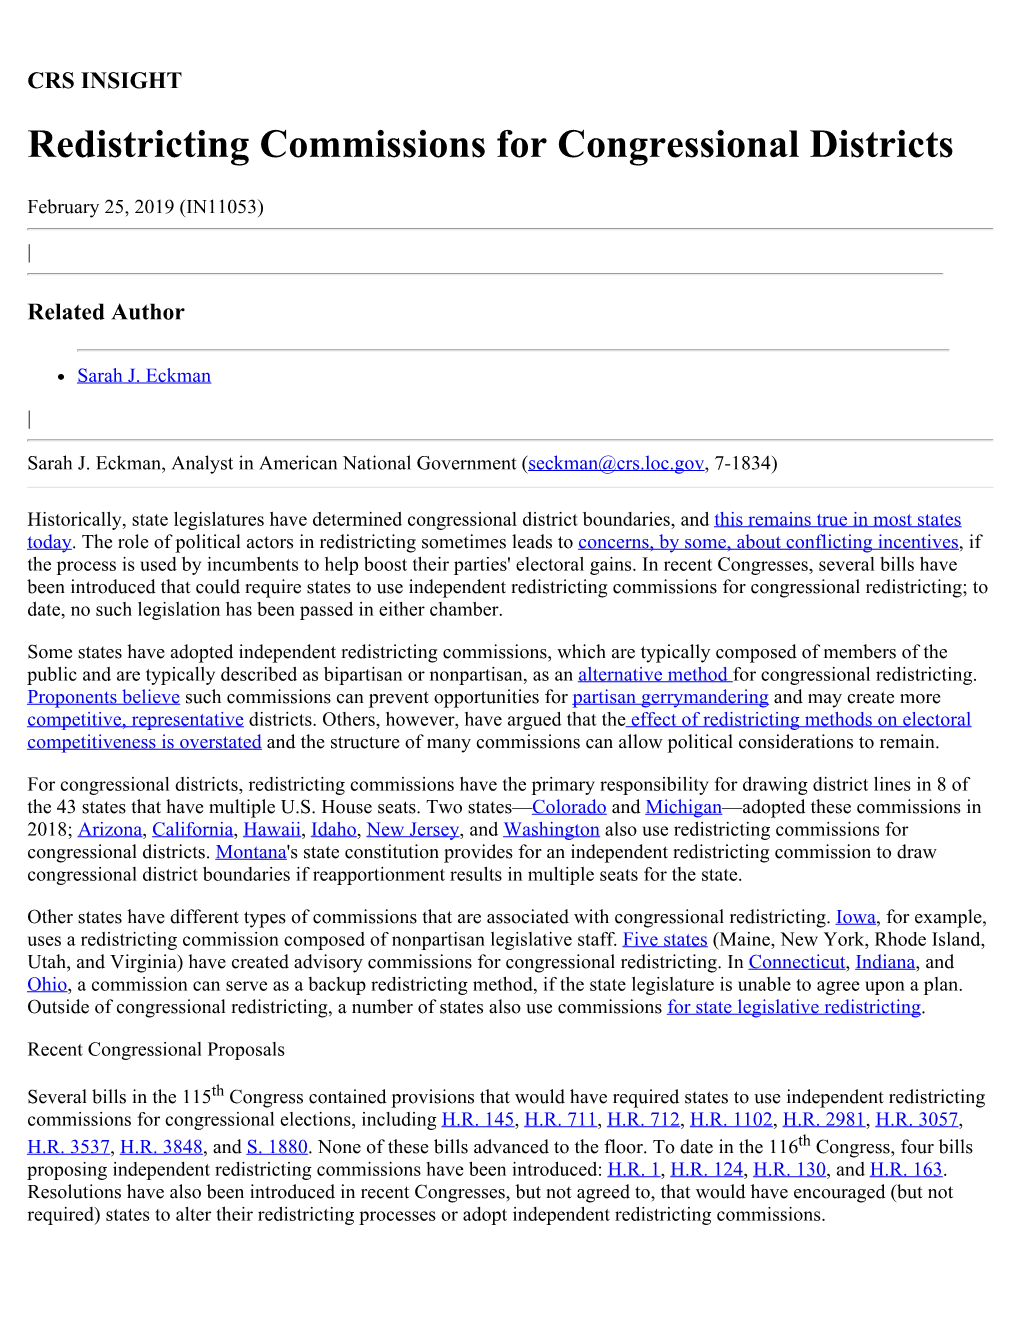 Redistricting Commissions for Congressional Districts